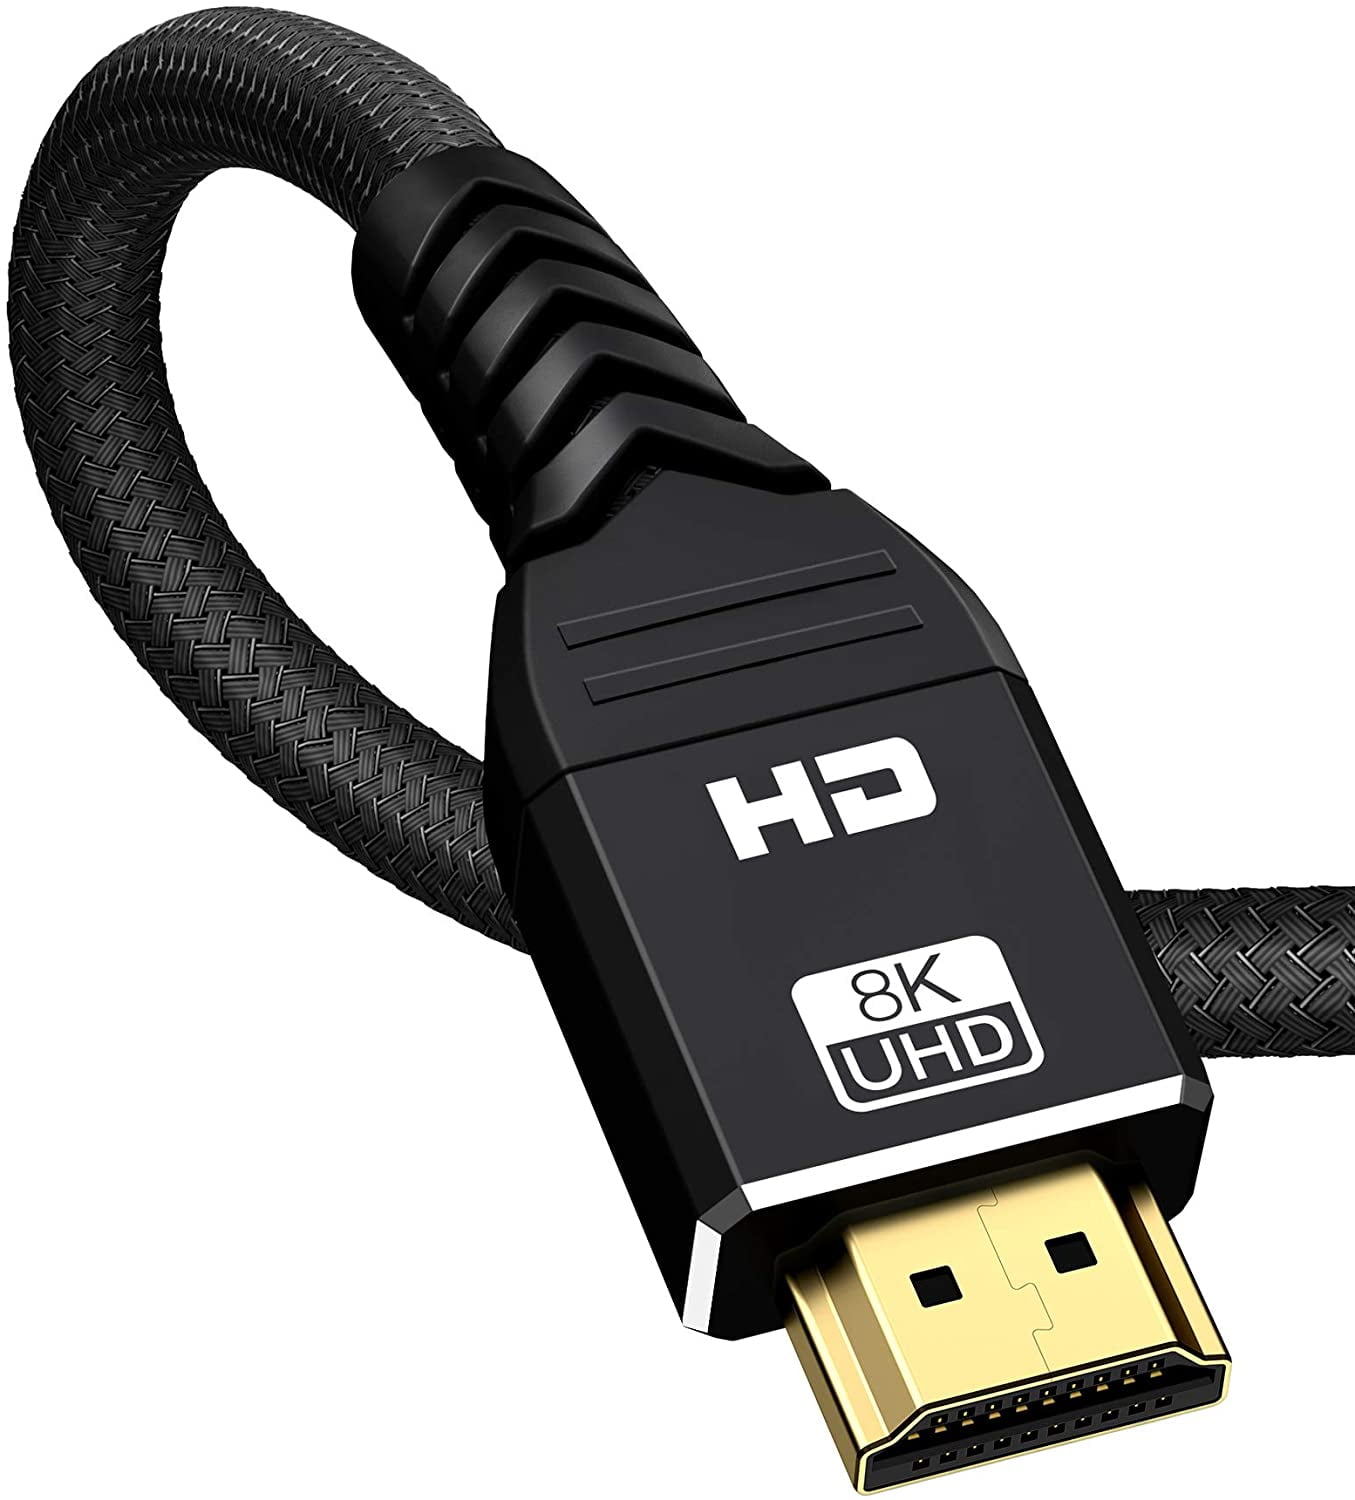 8K HDMI Cable 2.1 48Gbps 9.9FT/3M, High Speed HDMI Braided Cord-4K@120Hz  8K@60Hz,Compatible with Roku TV/PS5/HDTV/Blu-ray 